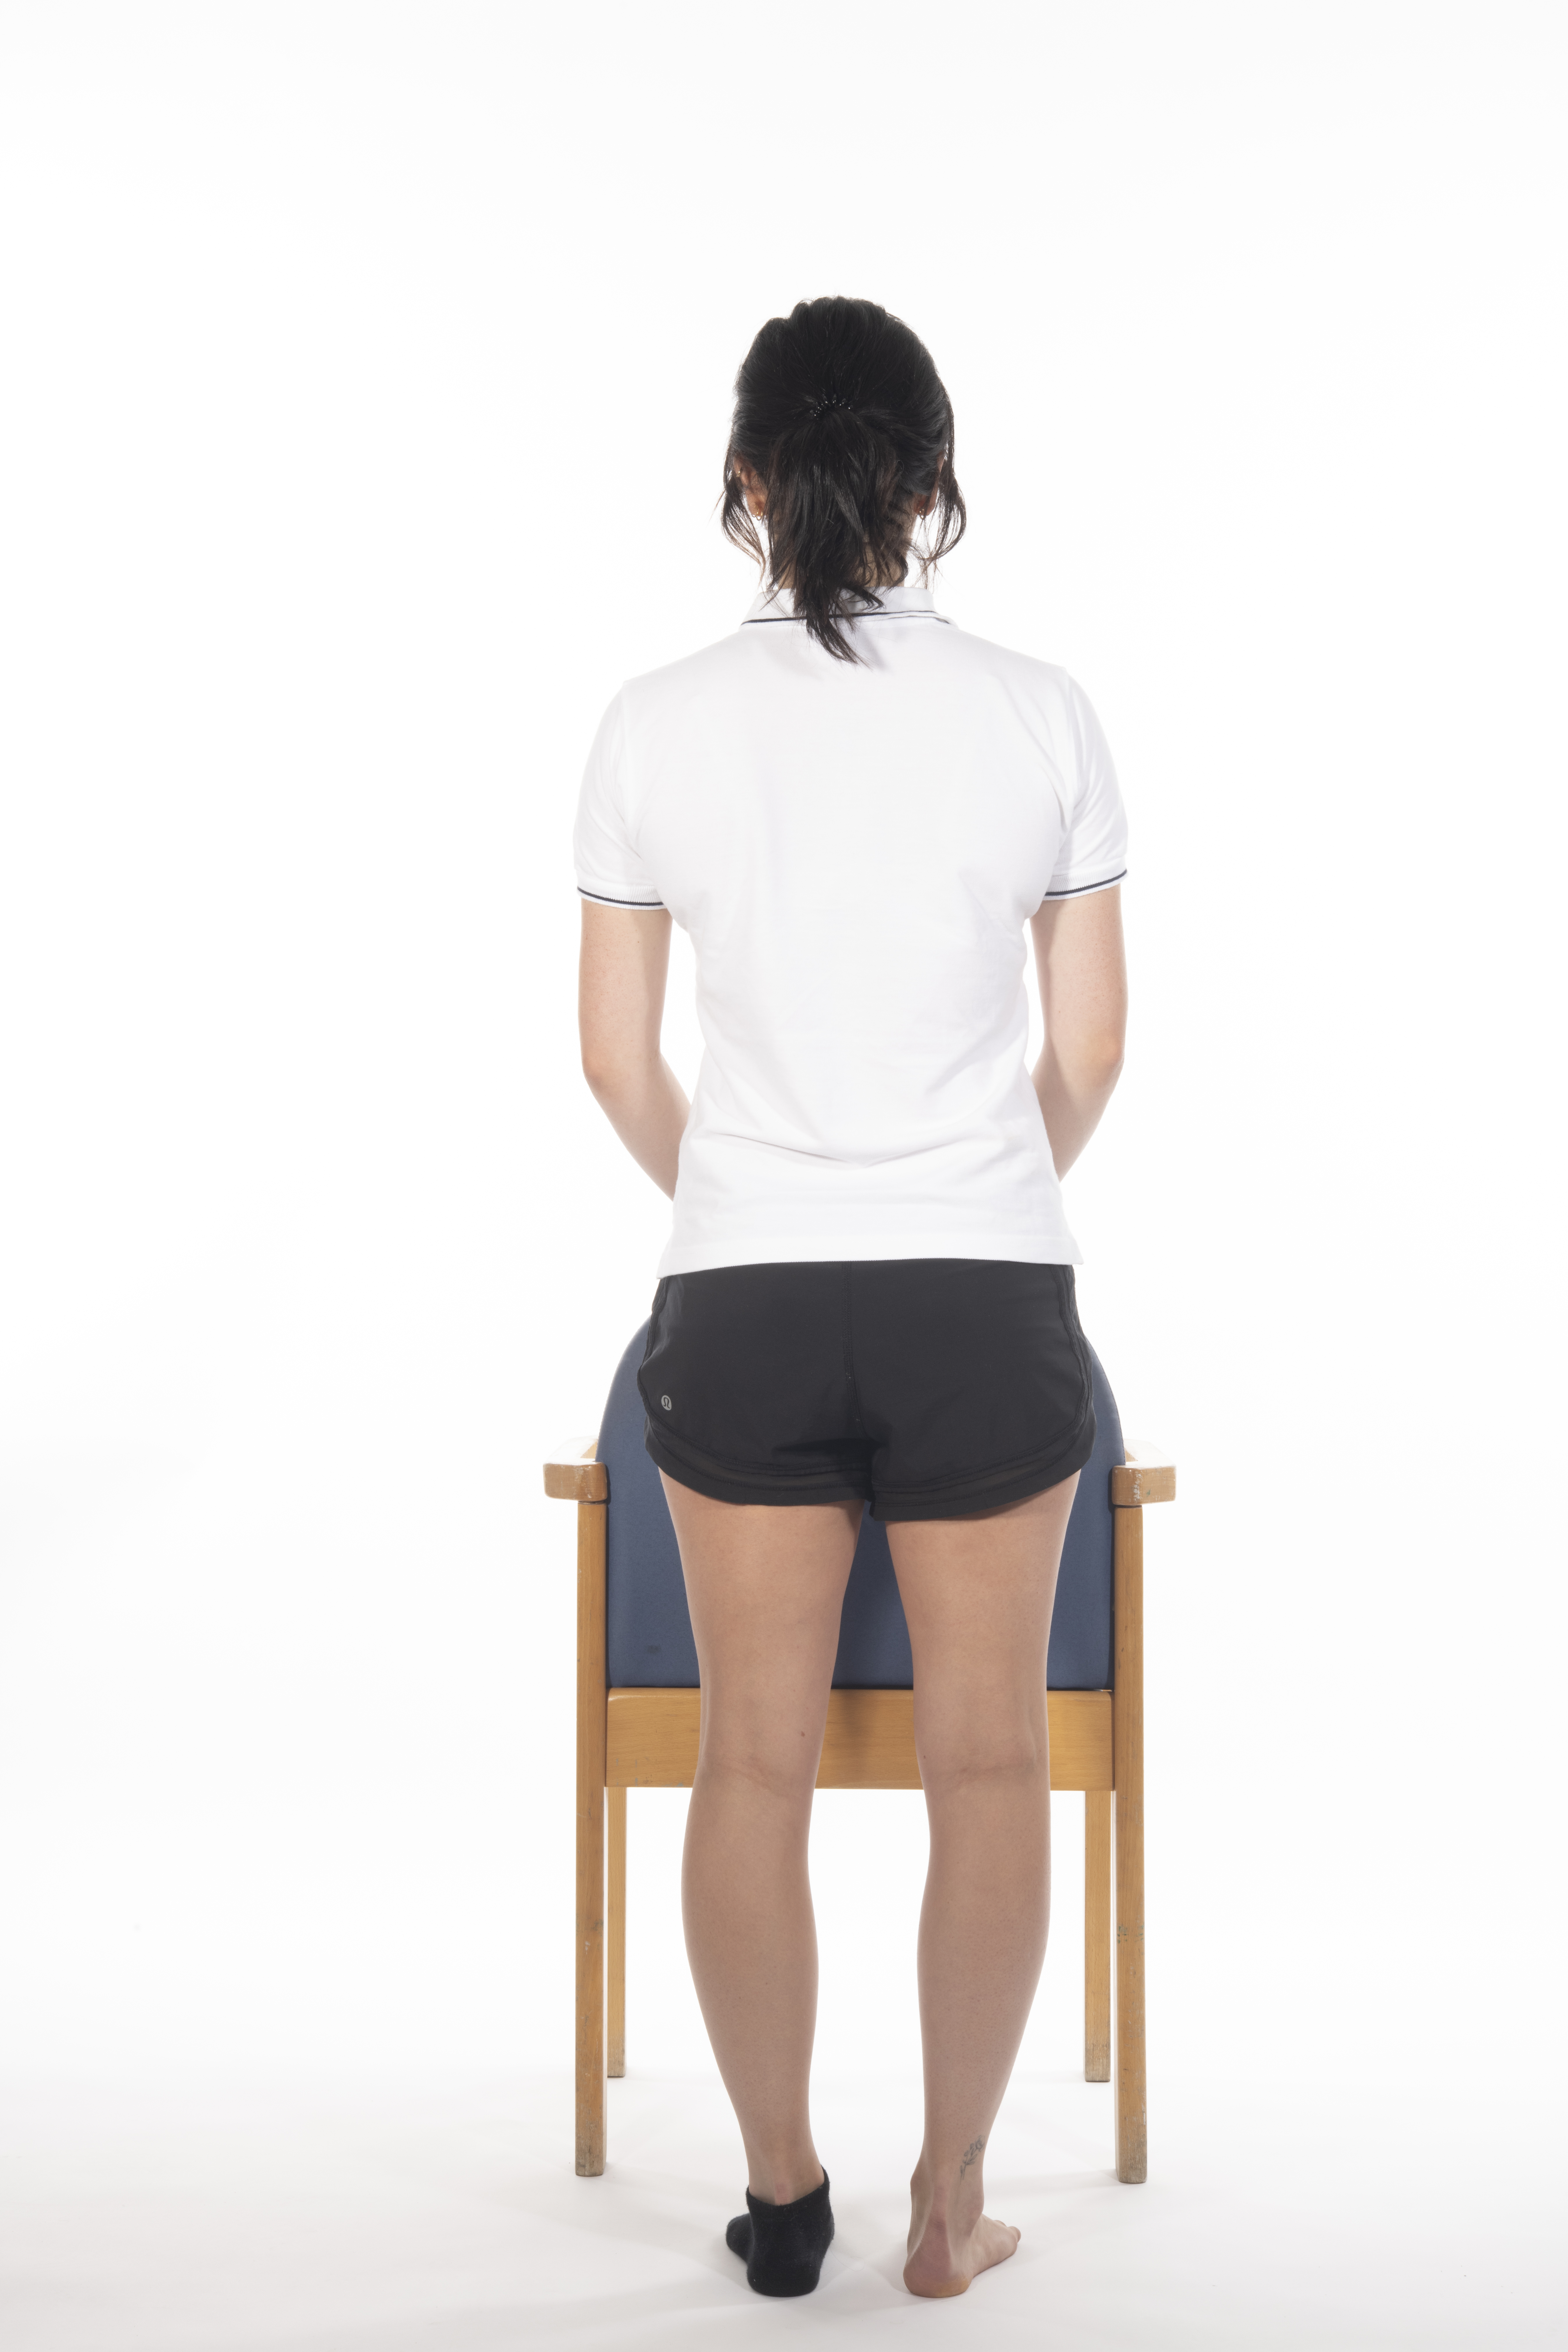 Hip abduction in standing exercise; slowly lower your leg